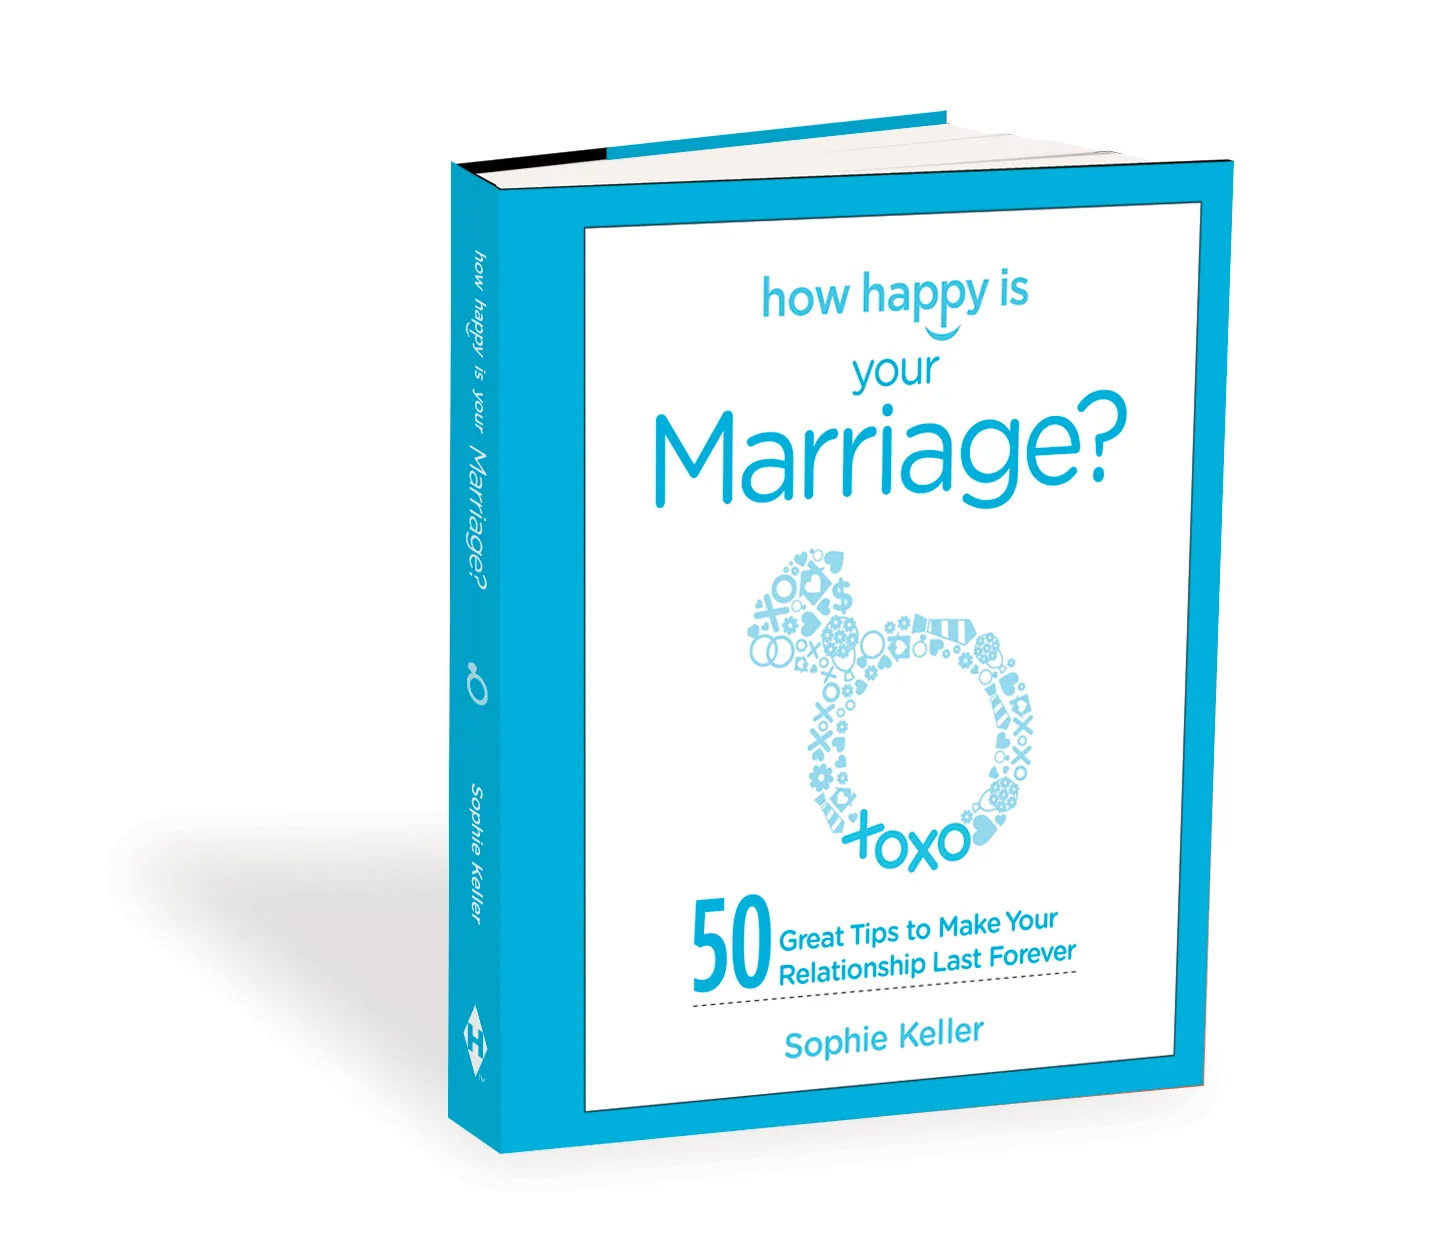 How Happy is Your Marriage? 50 Great Tips To Make Your Relationship Last Forever